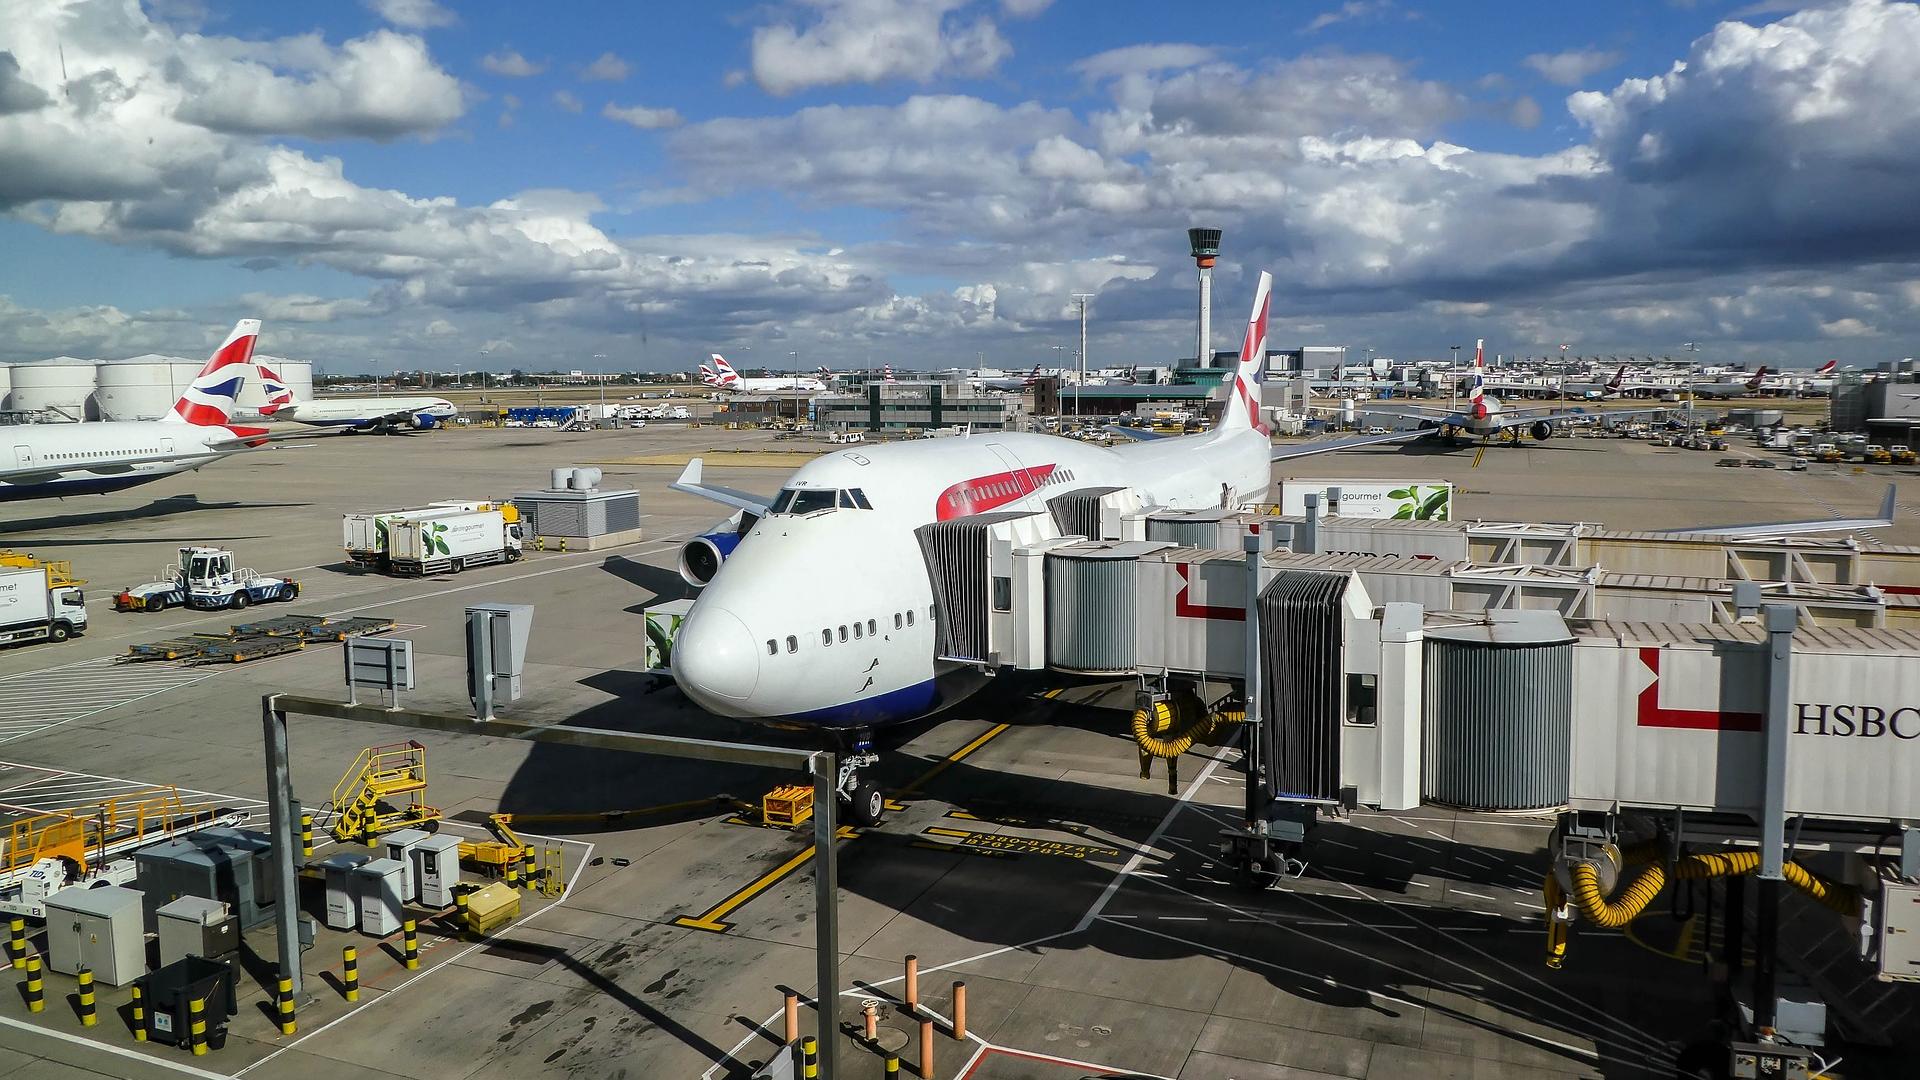 Plane on stand at Heathrow Airport